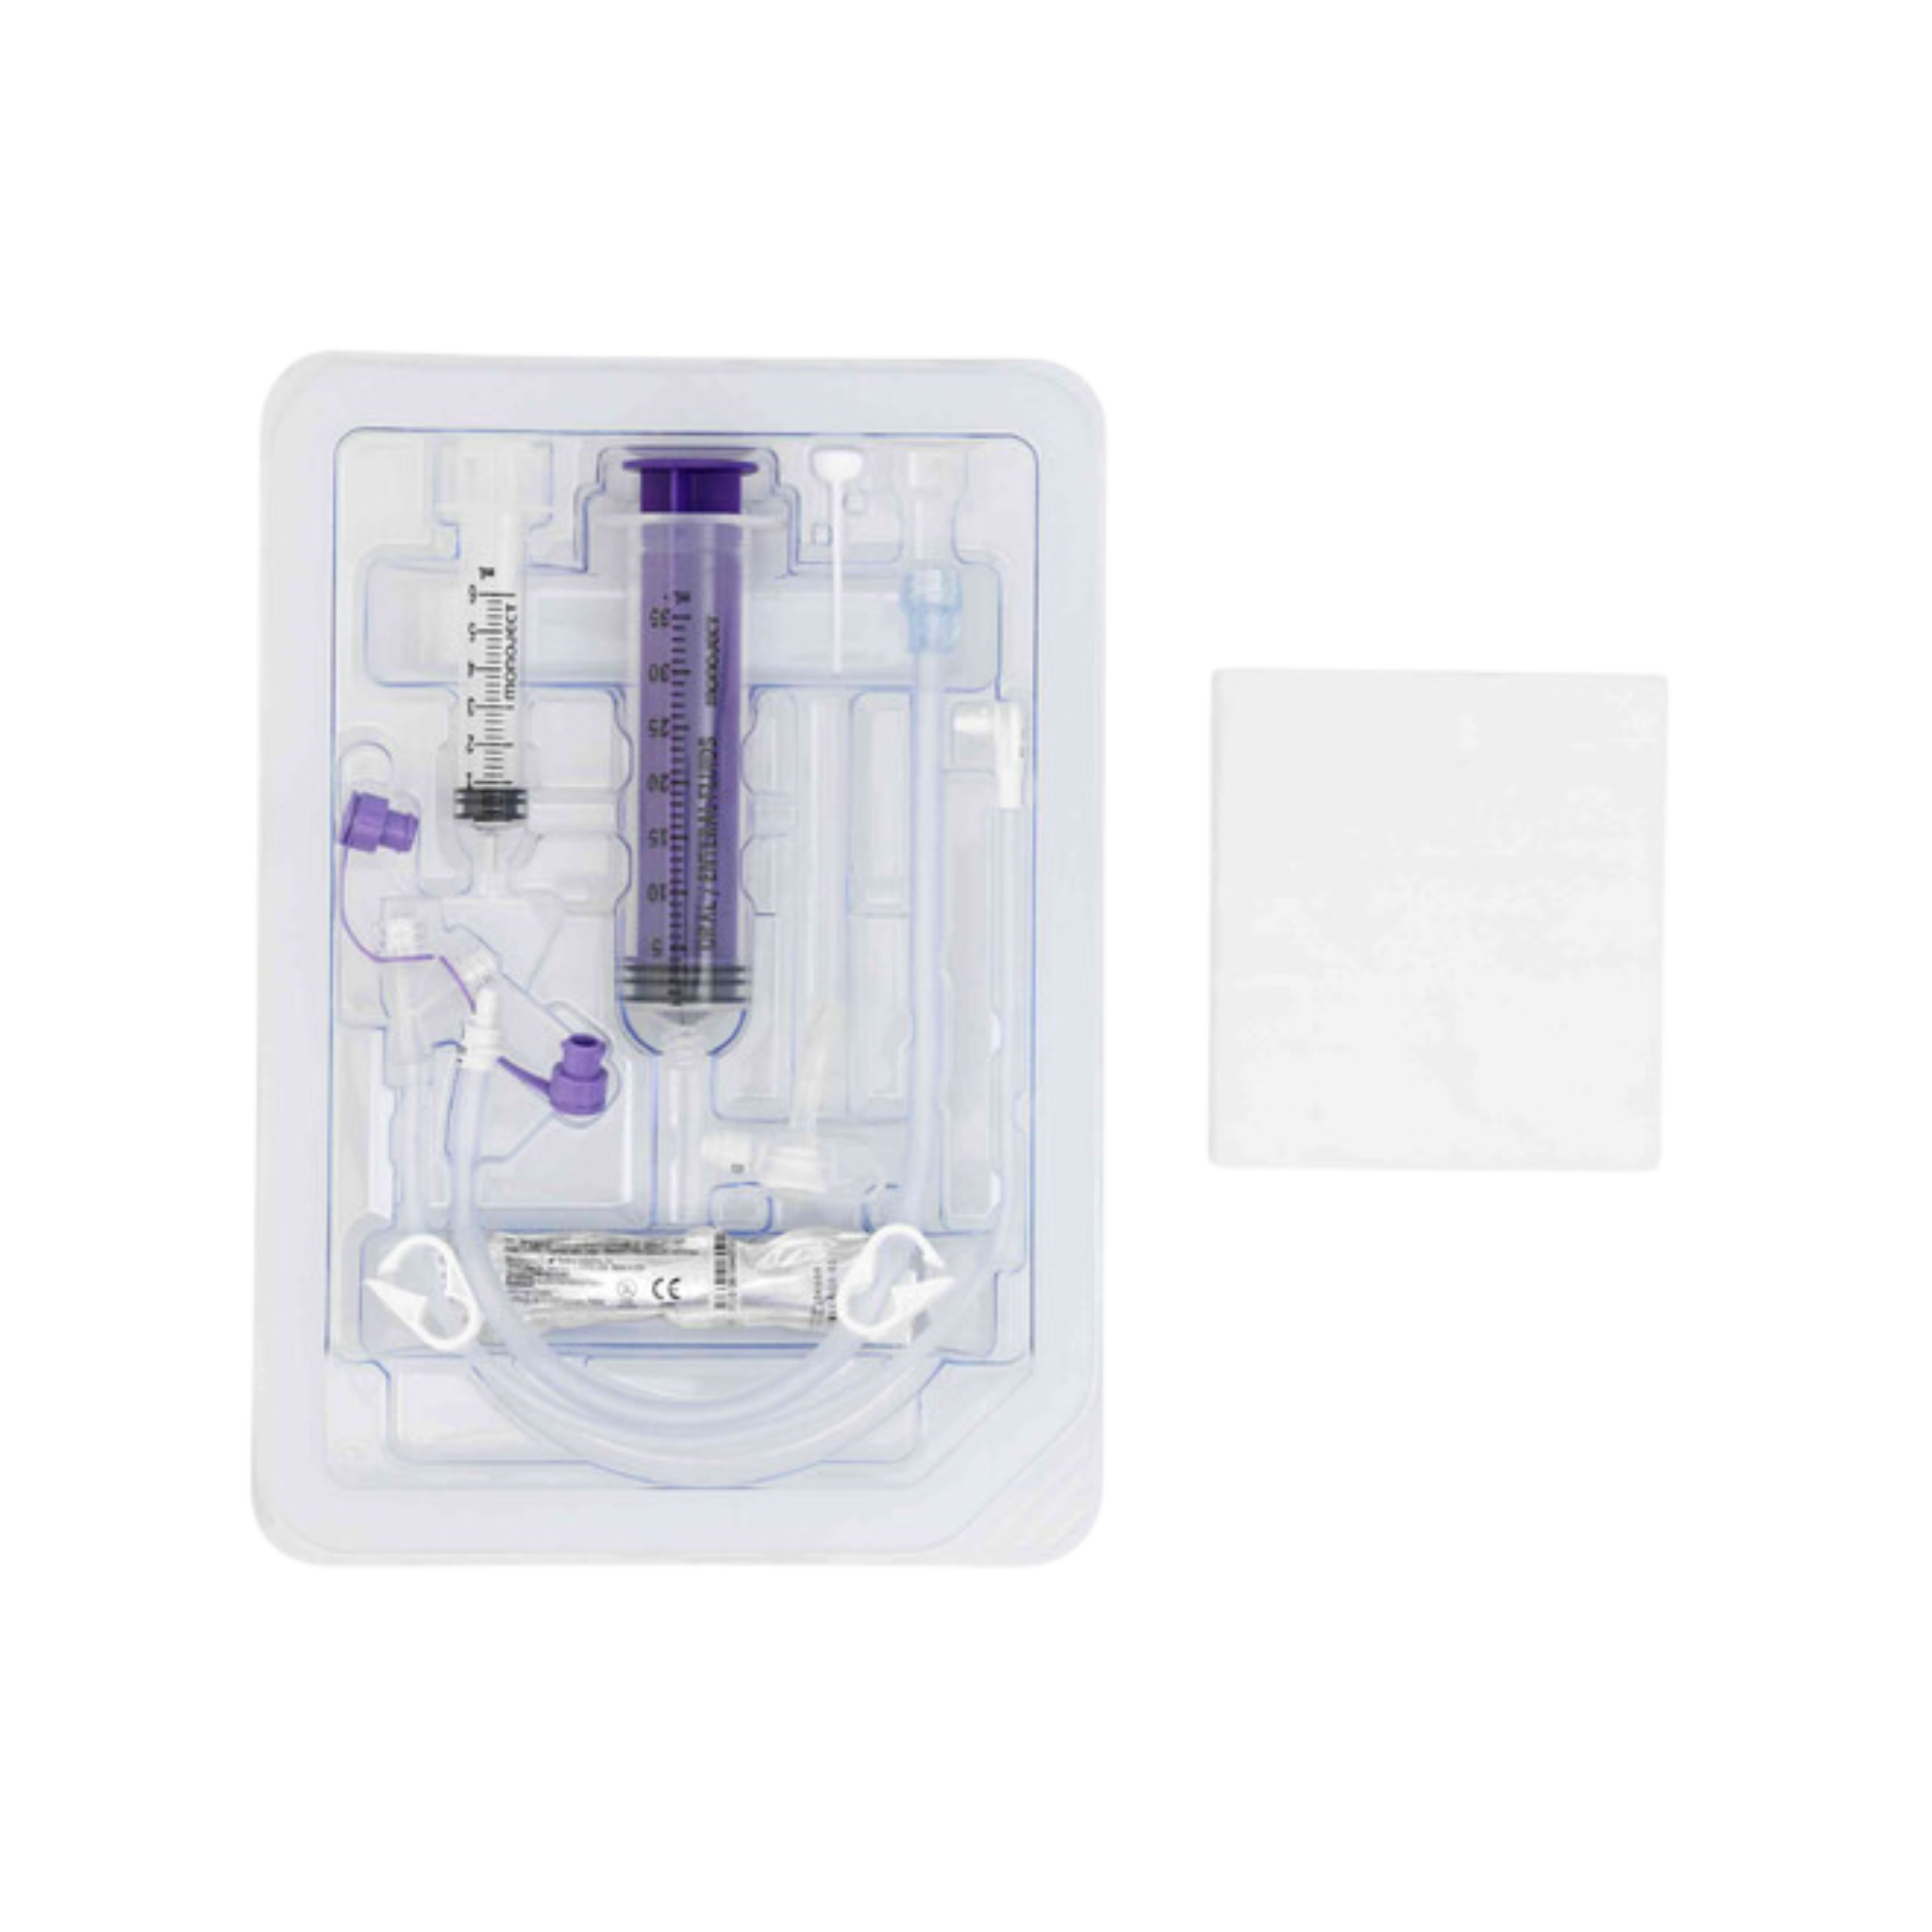 Avanos Mic-Key 14Fr Low-Profile Balloon Gastrostomy Feeding Tube Extension Sets With Enfit Connectors - All Lengths